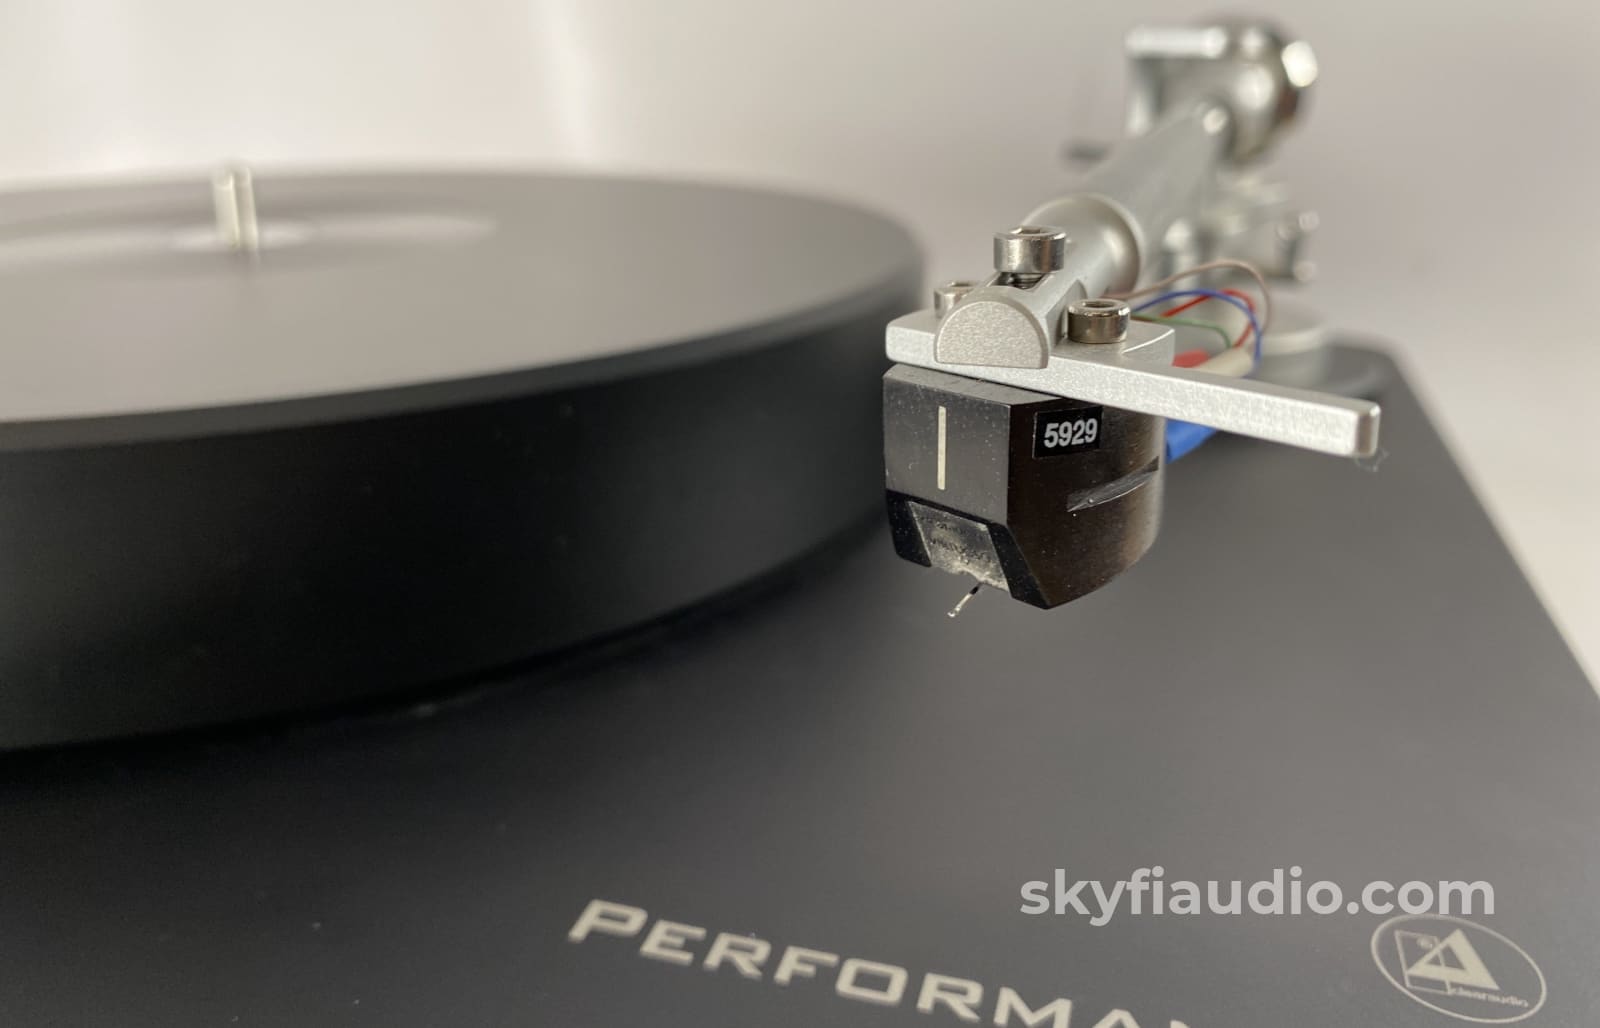 Clearaudio Performance Dc Turntable With Dust Cover And Virtuoso V2 Cartridge